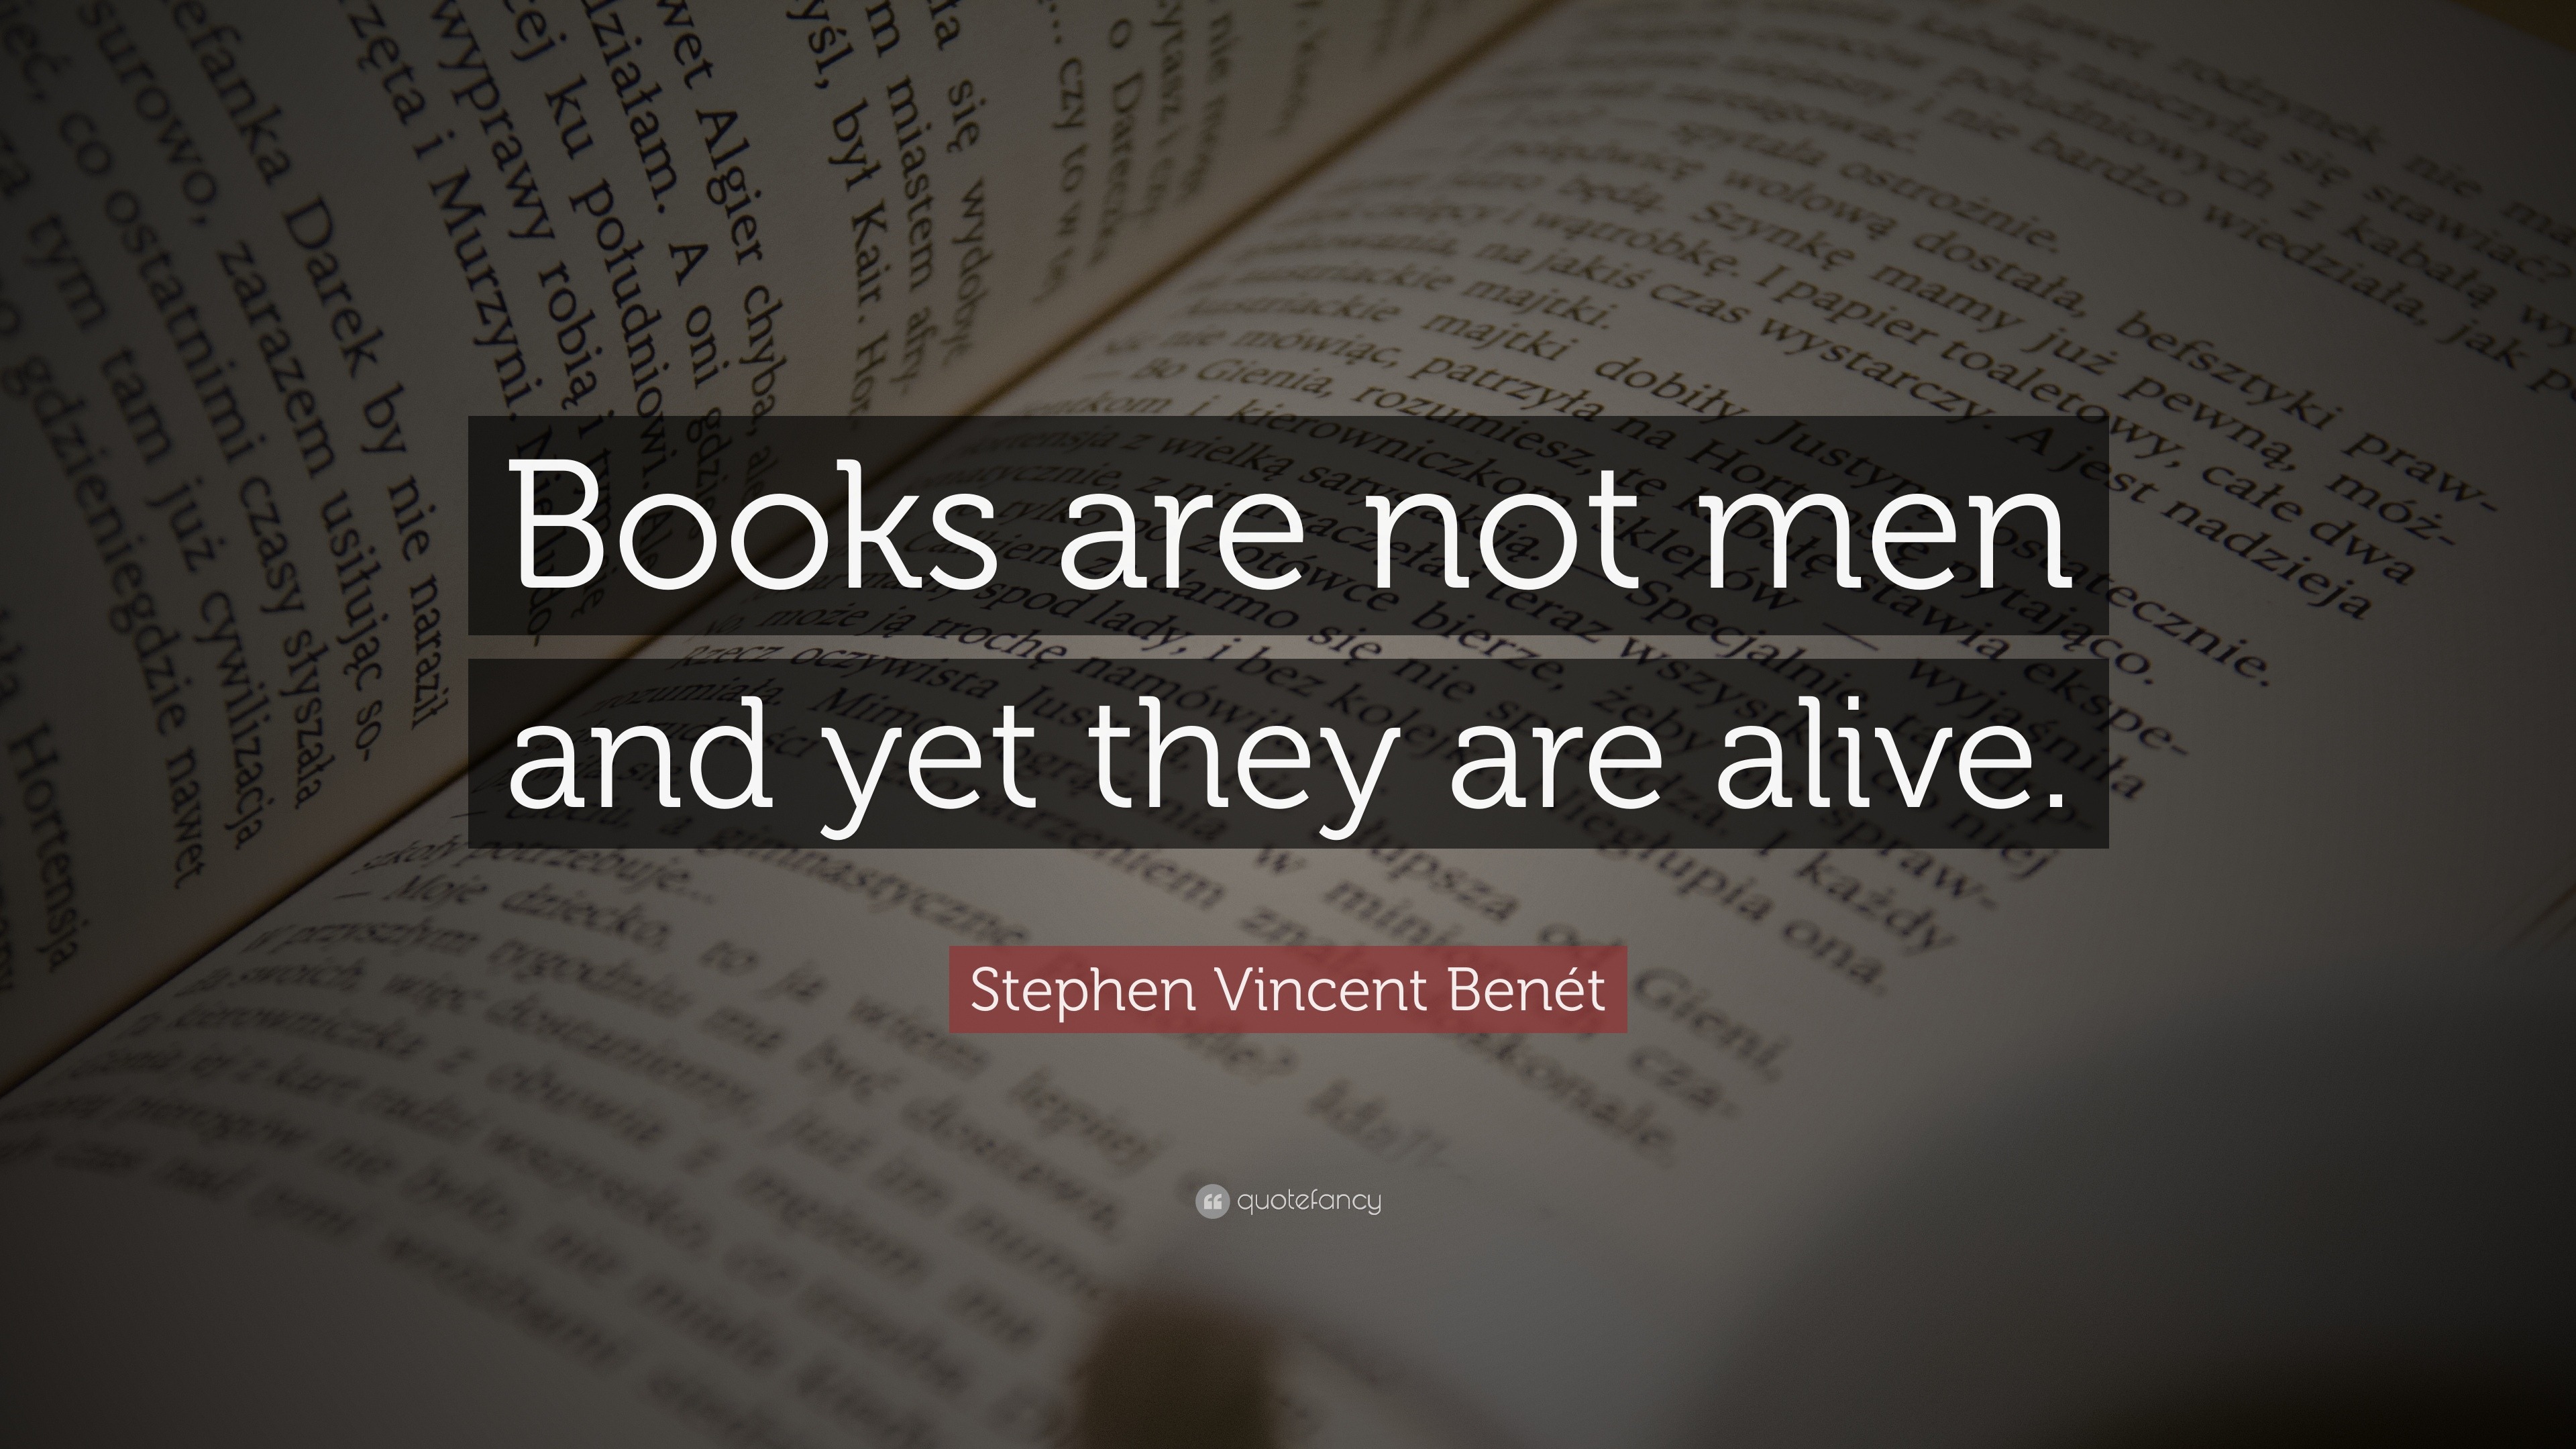 Stephen Vincent Benét Quote: “Books are not men and yet they are alive.”